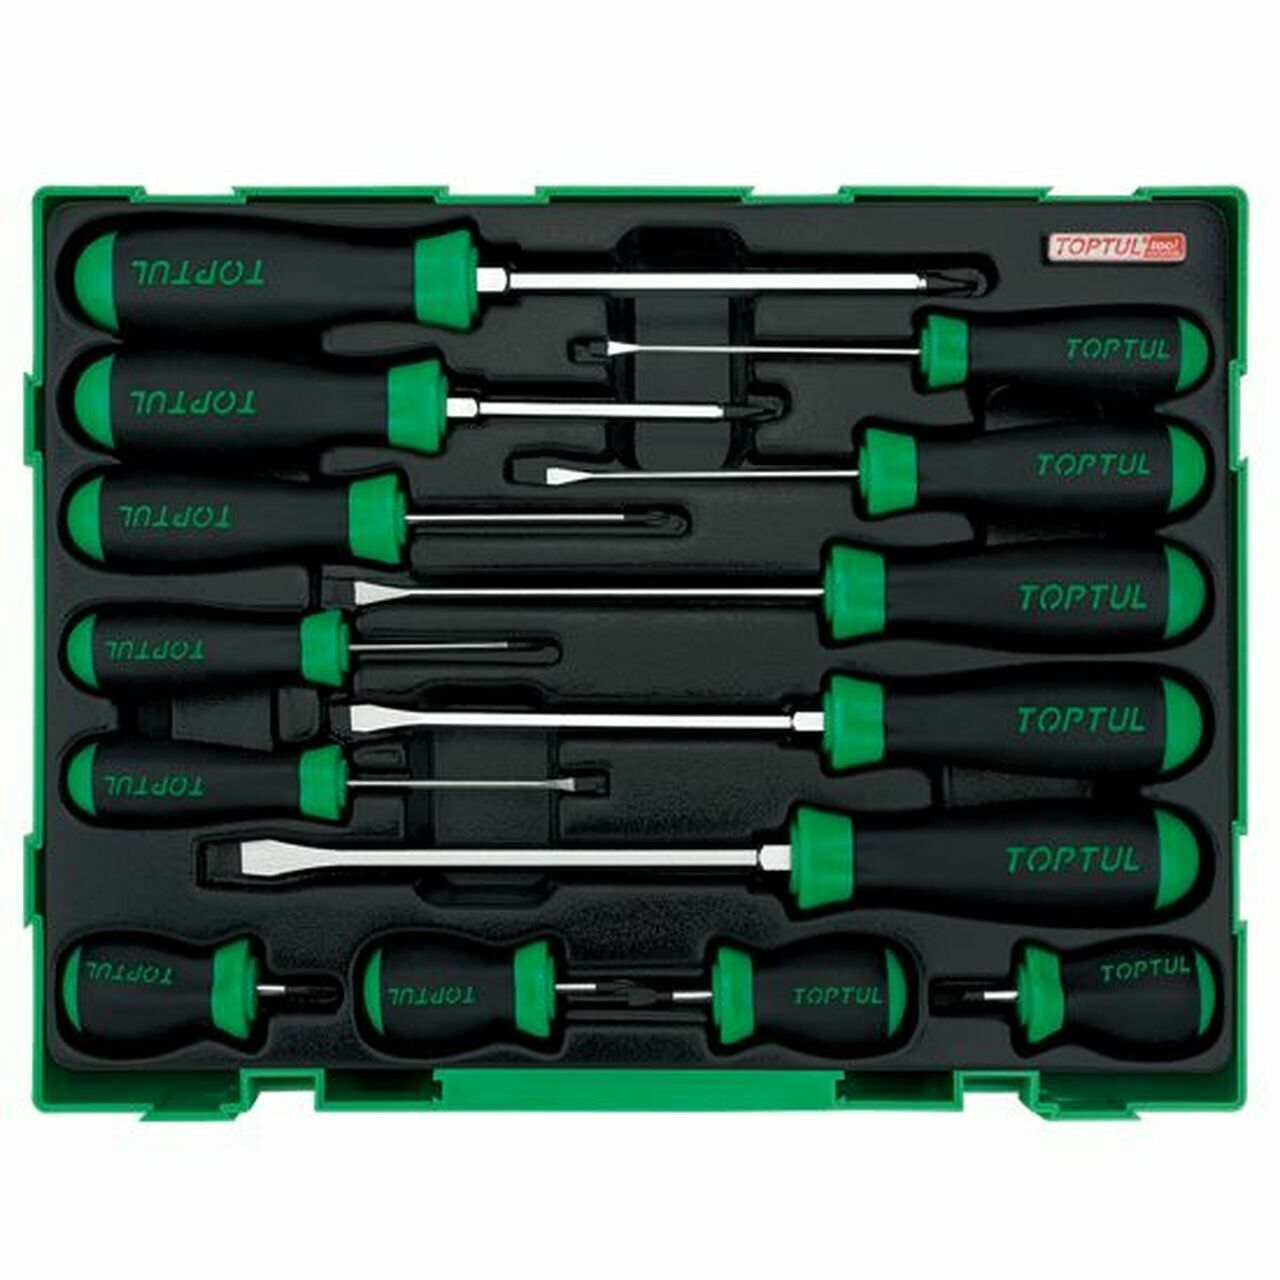 TOPTUL 14PC - Slotted  Phillips Screwdriver Set w/Tray GTC1401